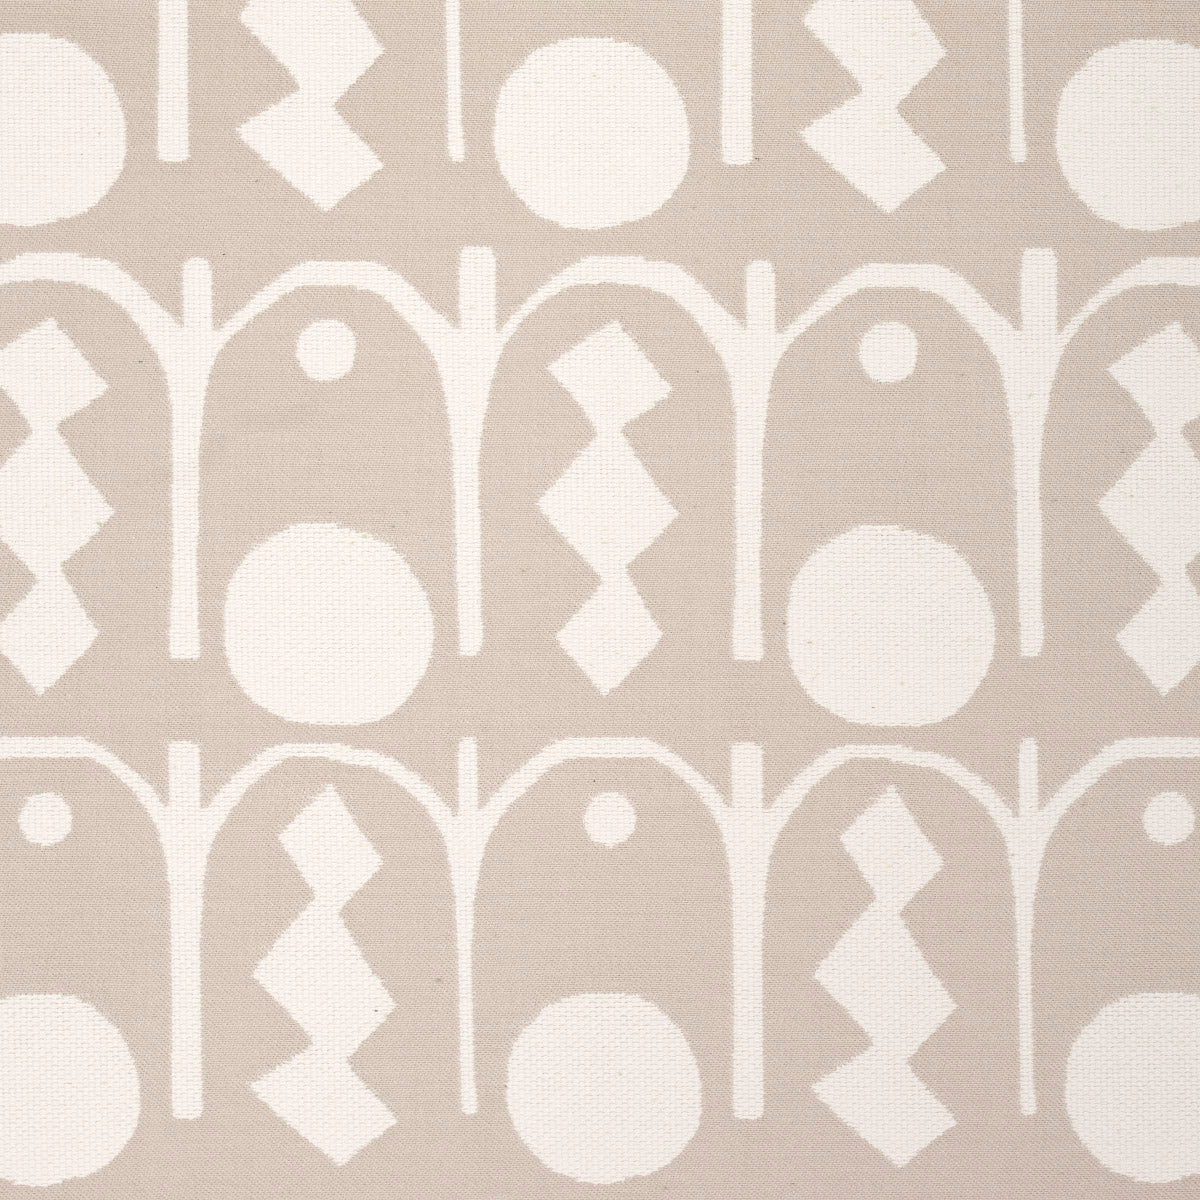 Purchase 83410 | Downtown, Natural - Schumacher Fabric